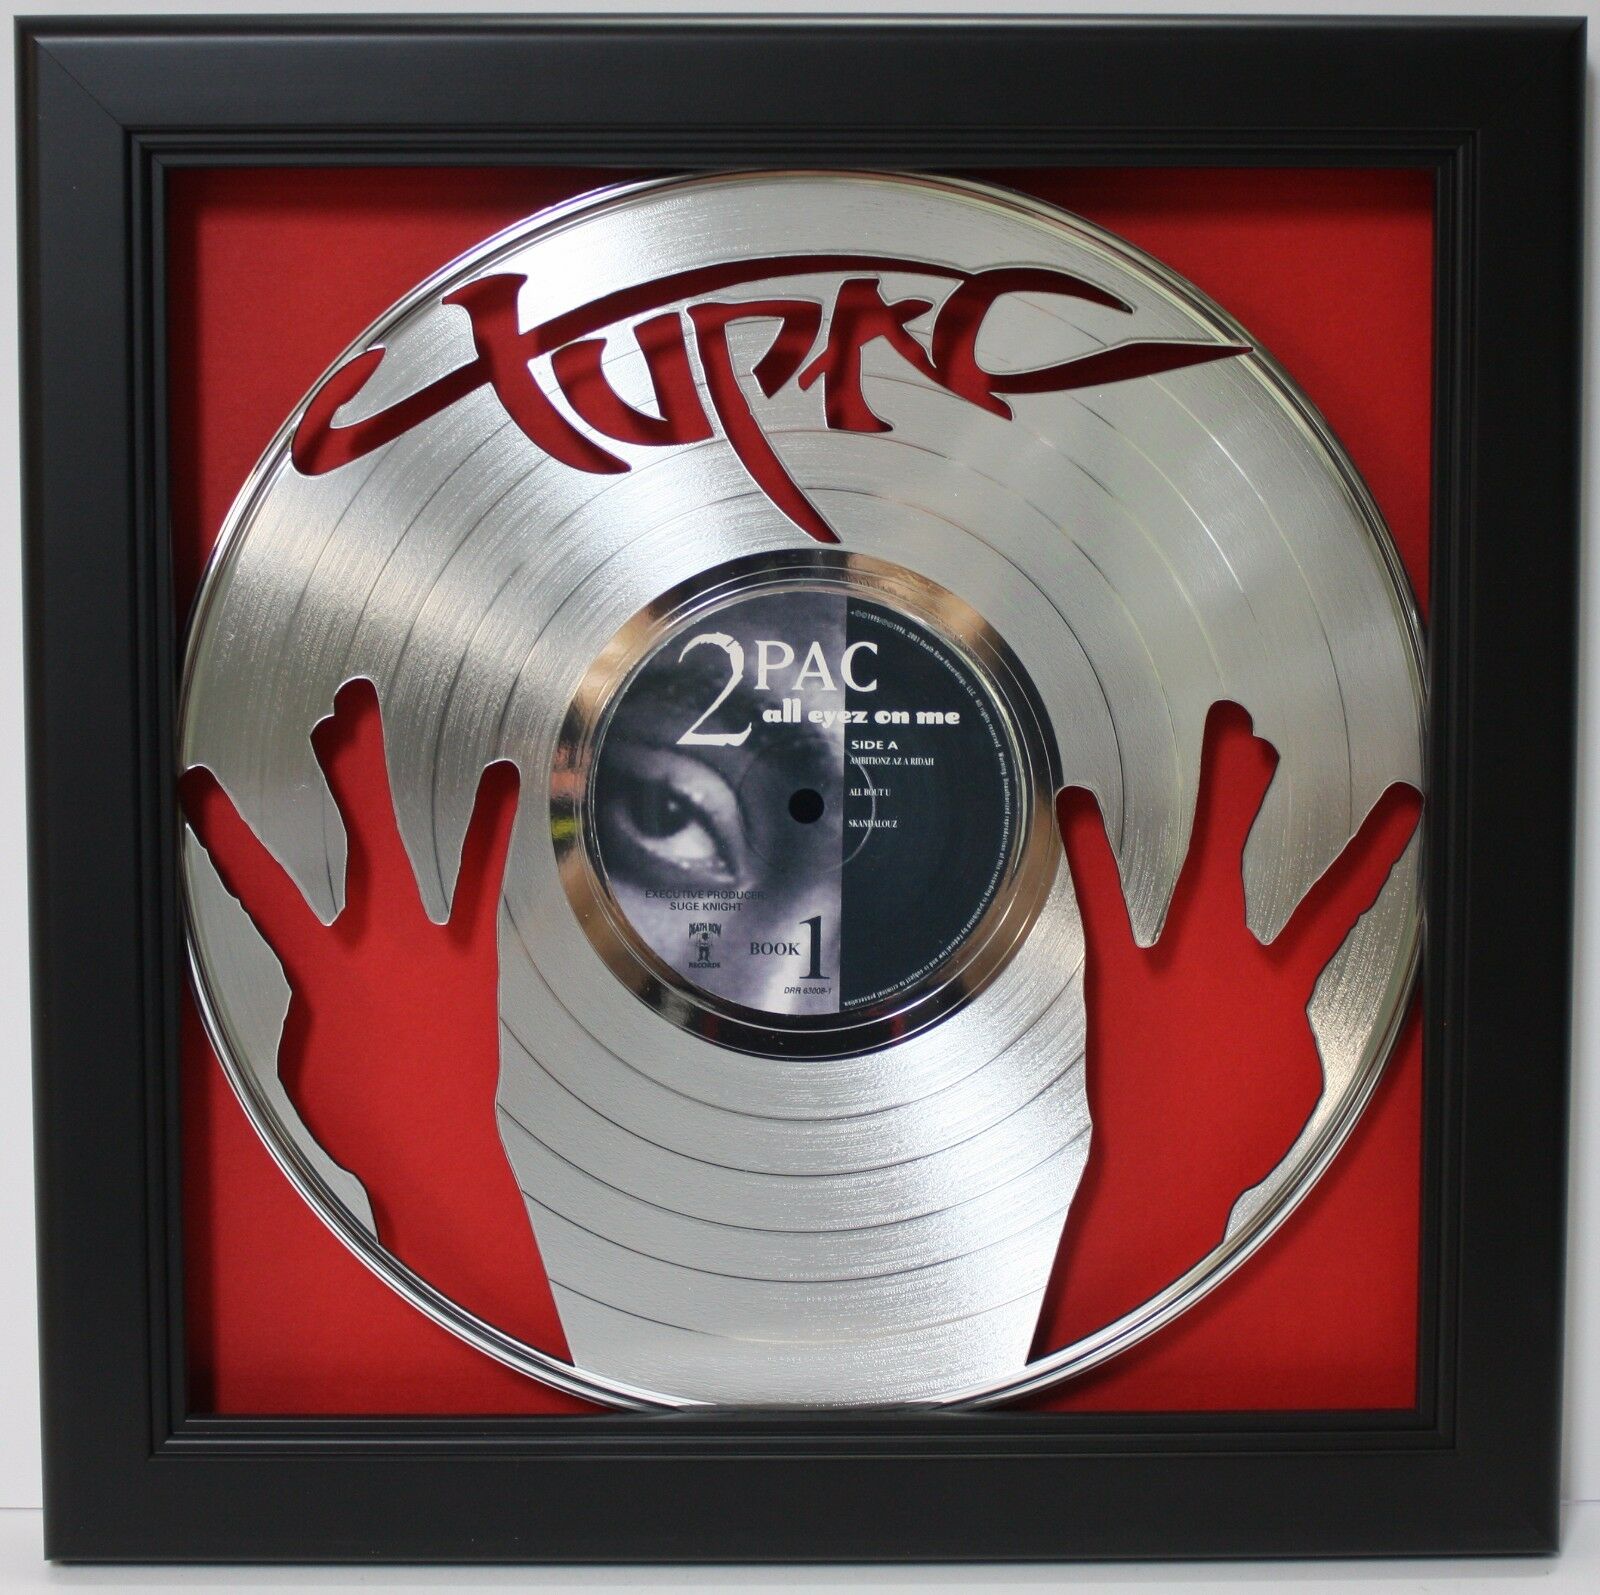 Tupac Shakur Framed Laser Cut Platinum Record in Shadowbox 2Pac - Gold Record Outlet Album and Disc Collectible Memorabilia